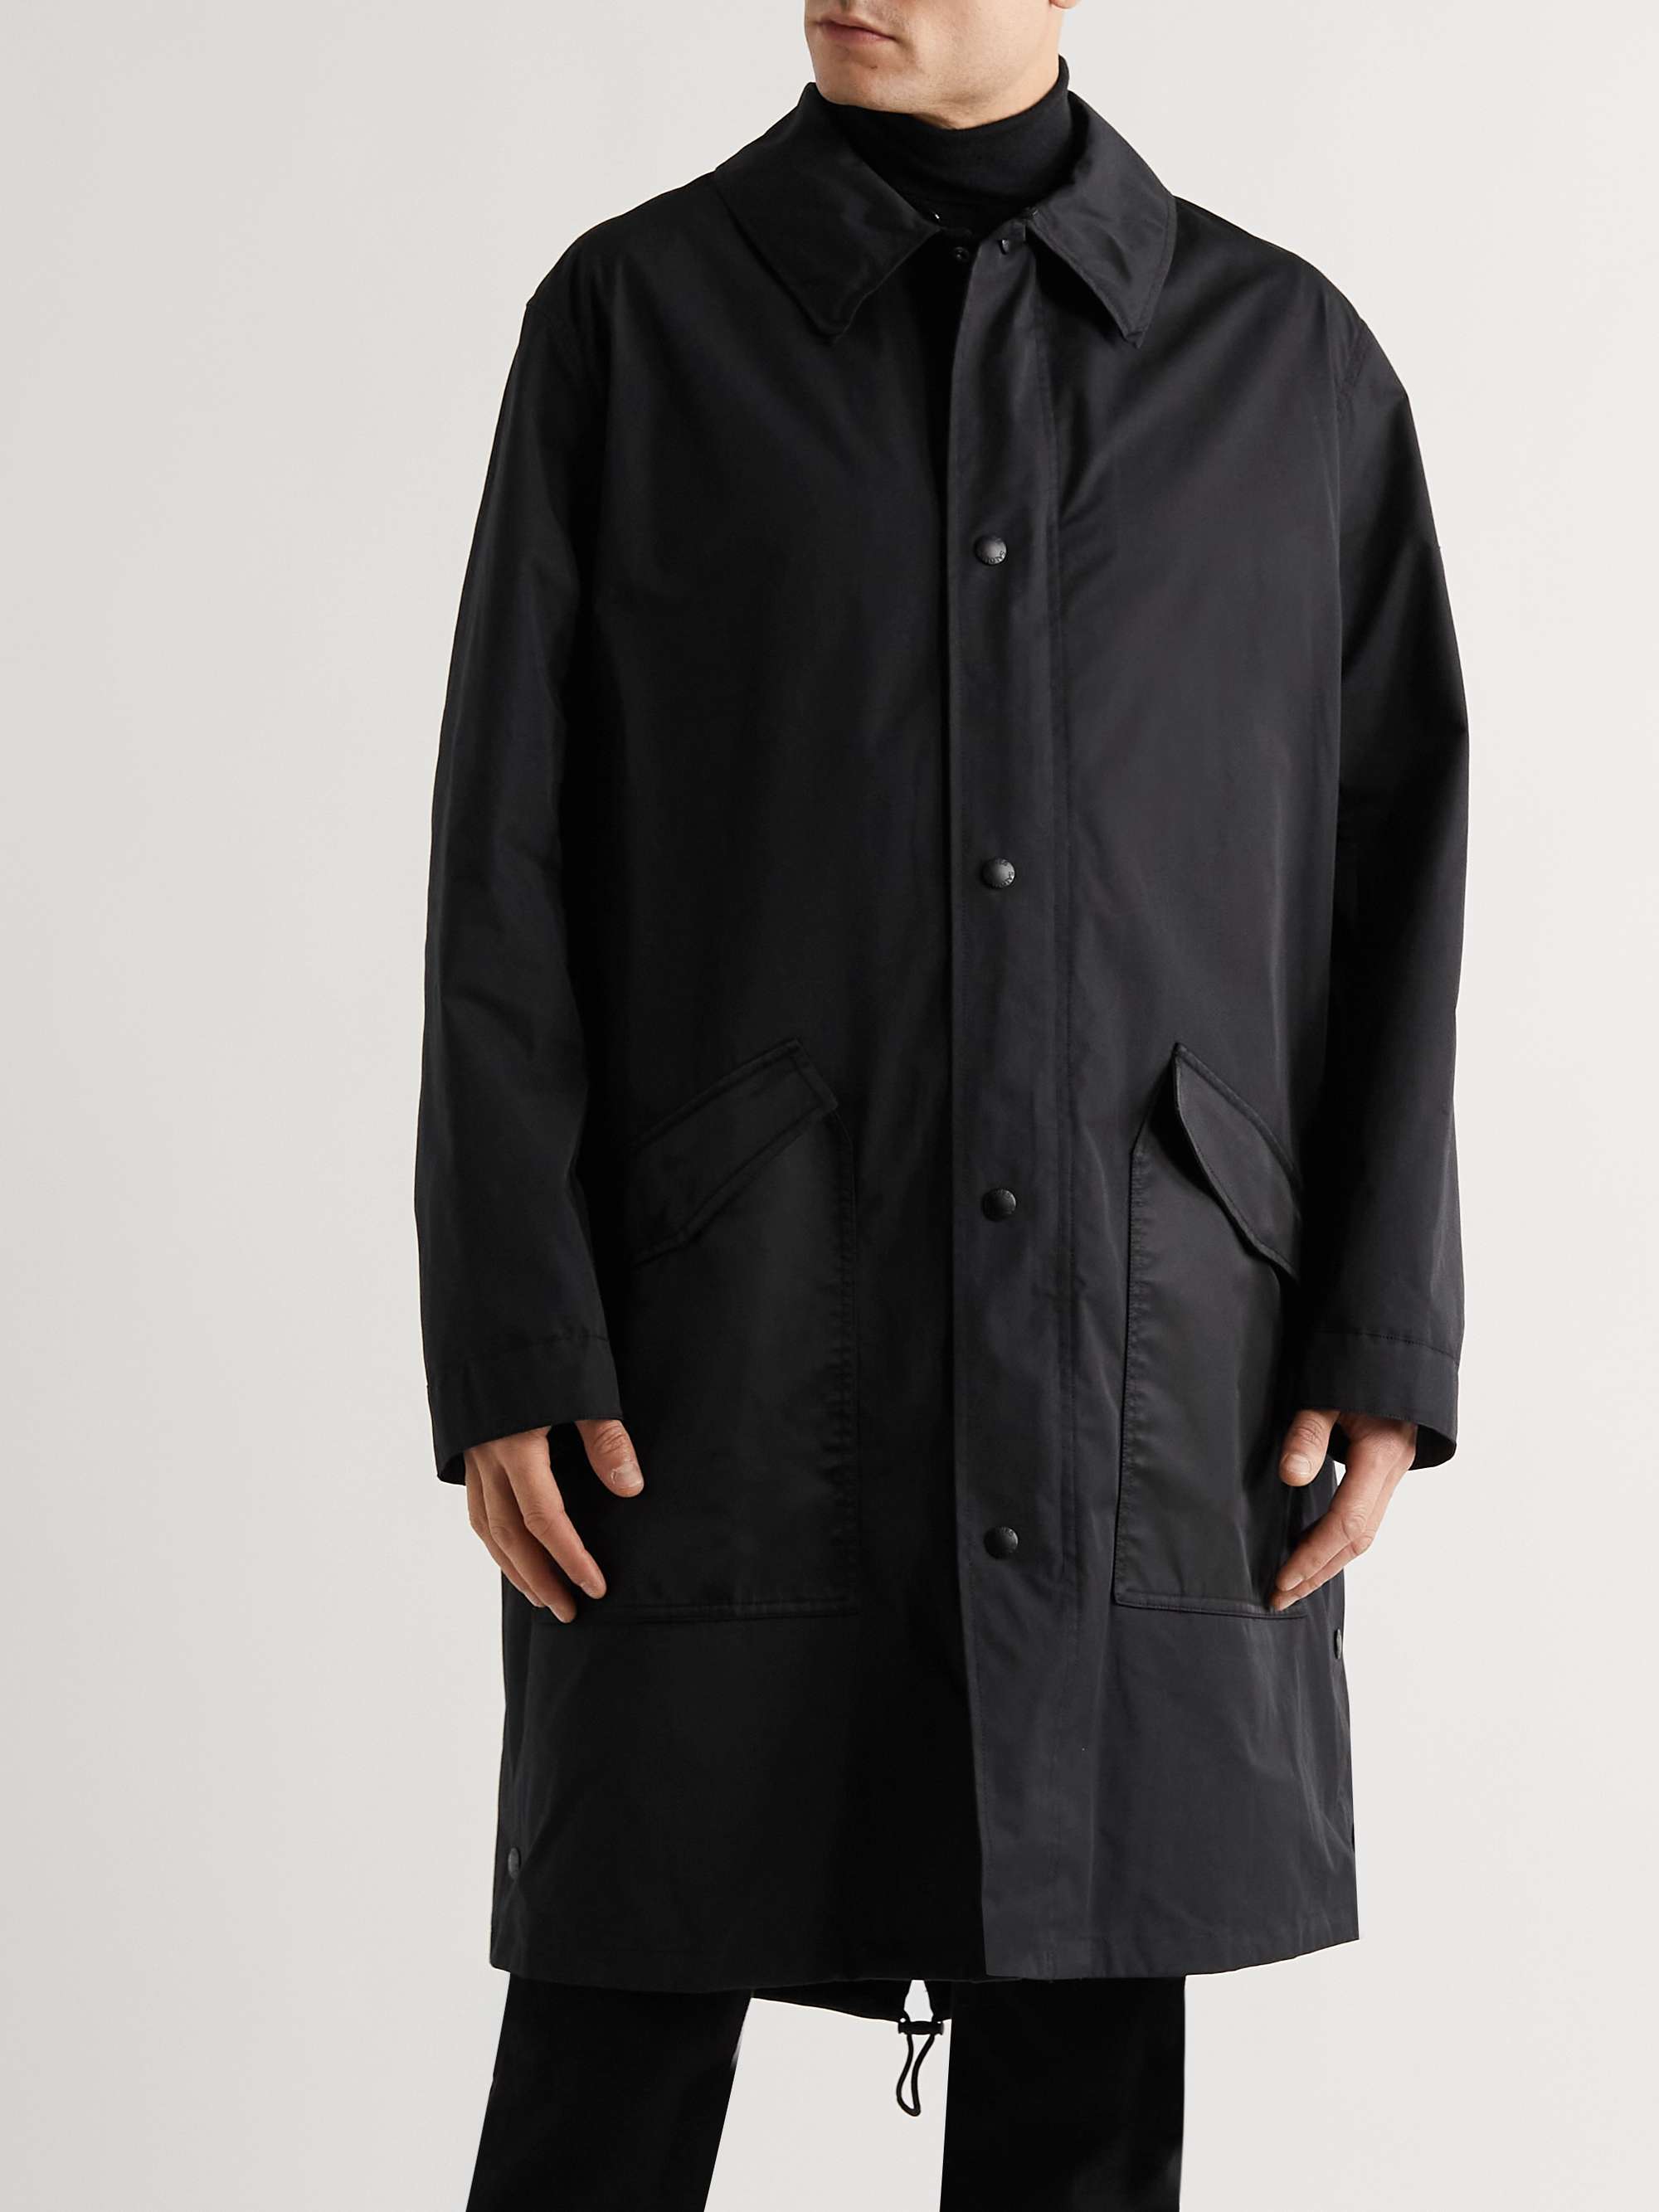 YVES SALOMON Cotton-Blend Hooded Down Parka with Detachable Shearling Liner